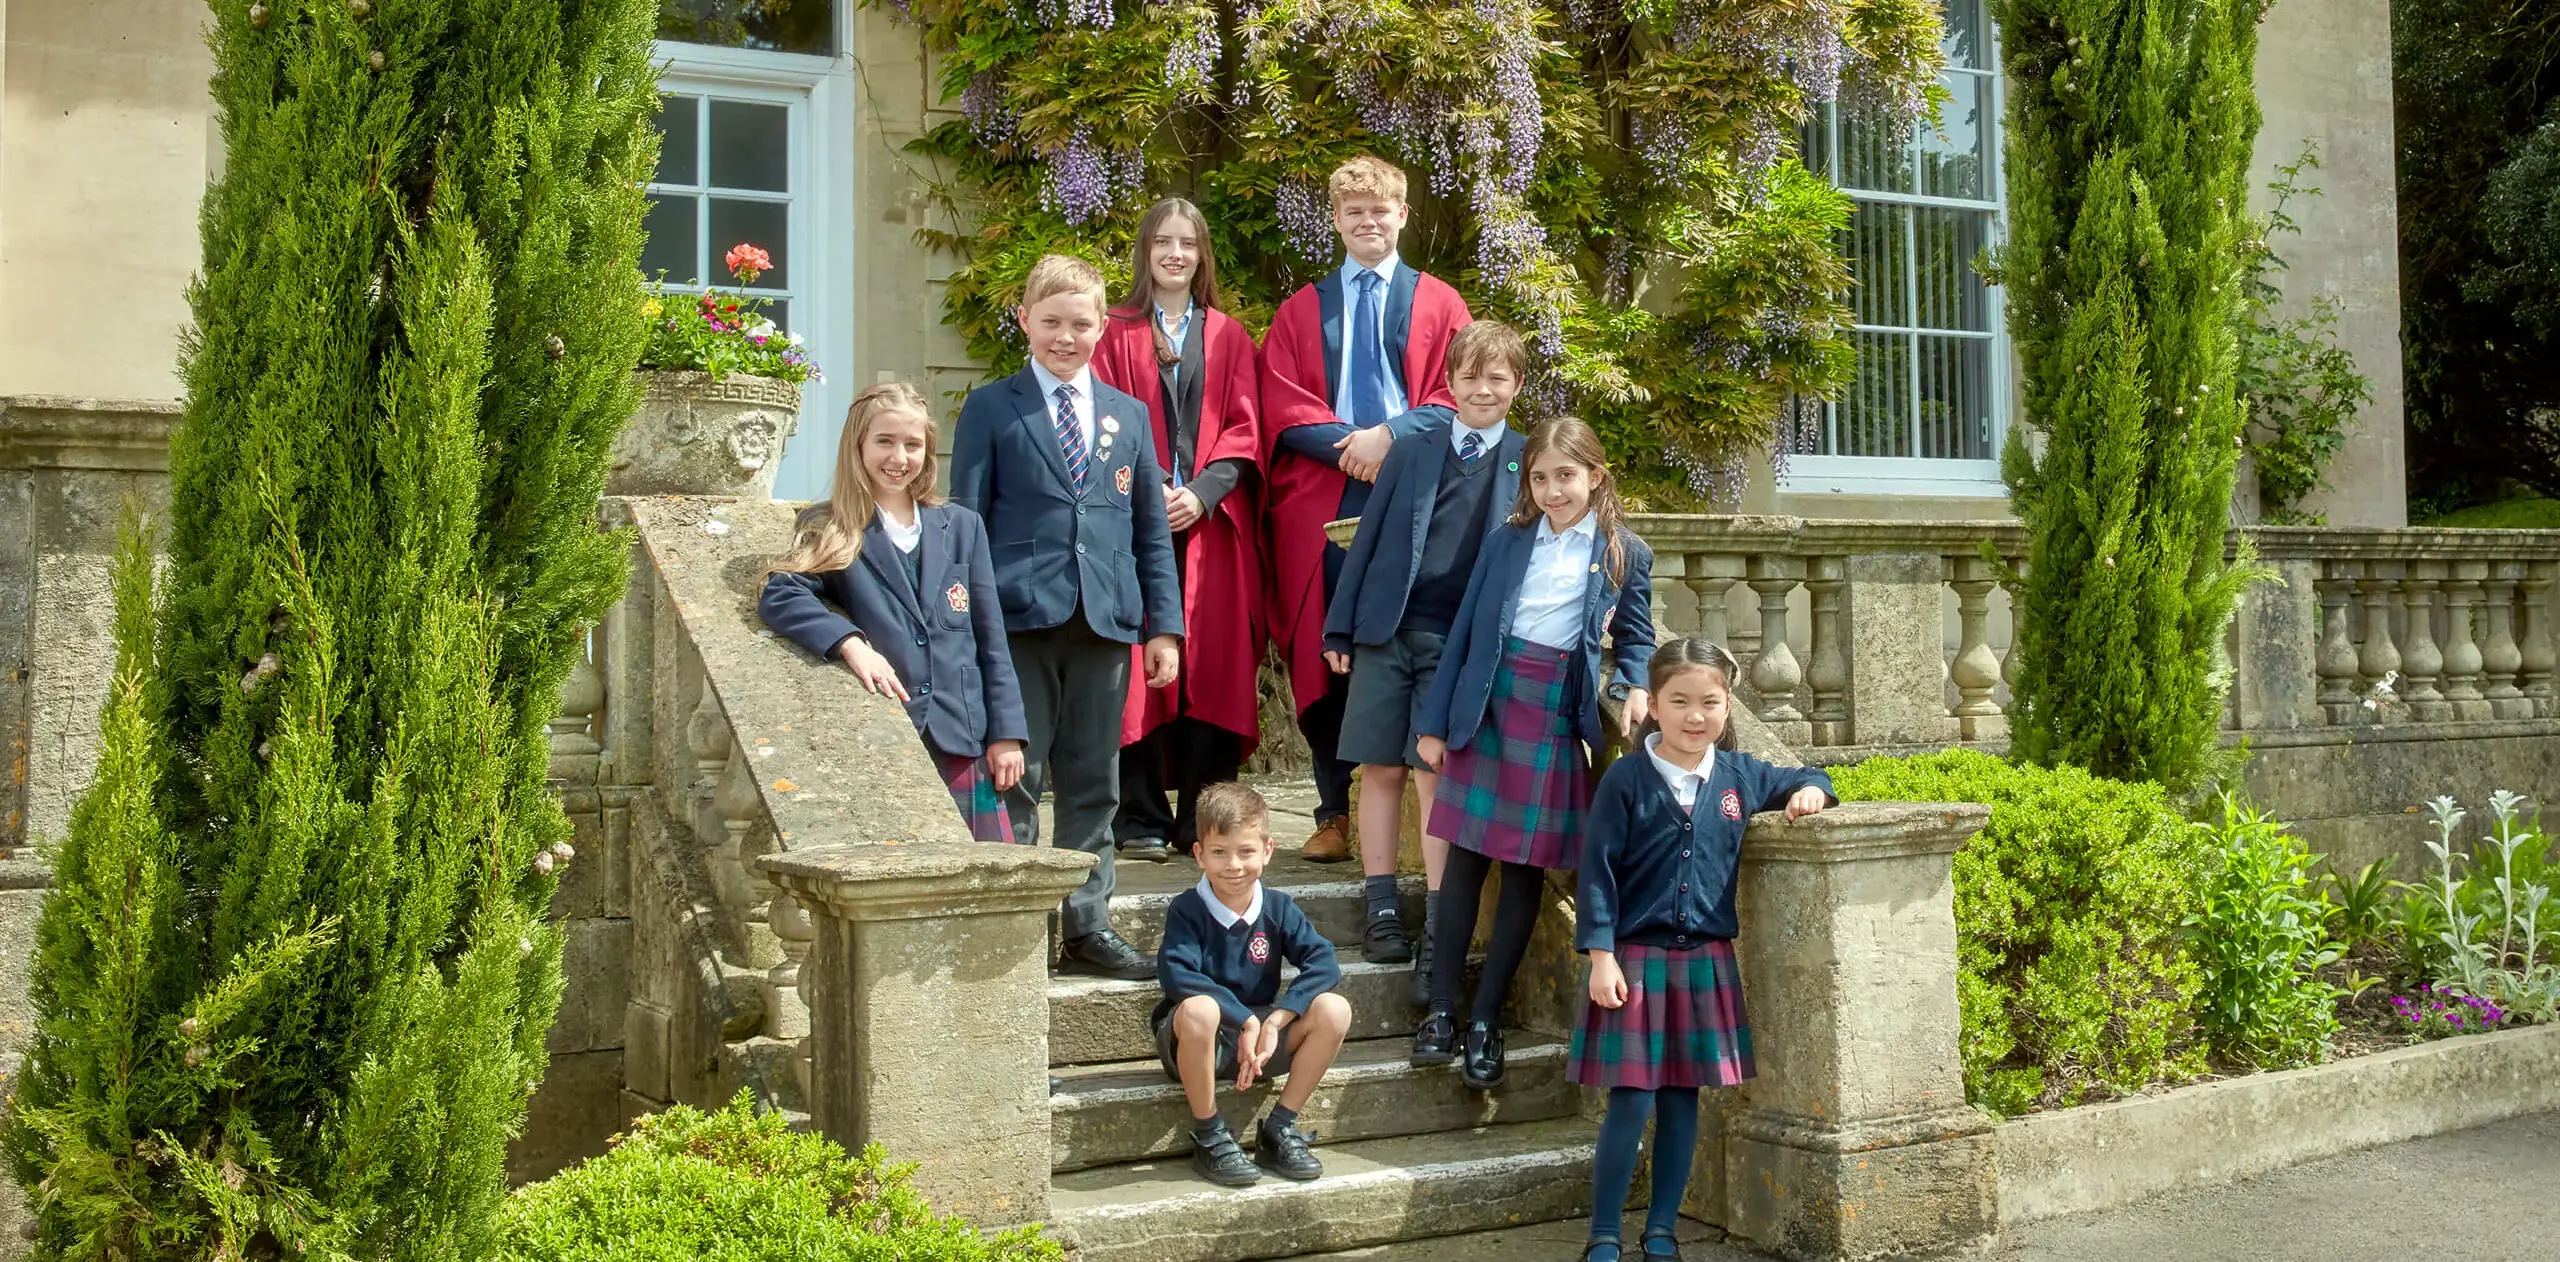 Latest news from KES Bath, a private school in South West England